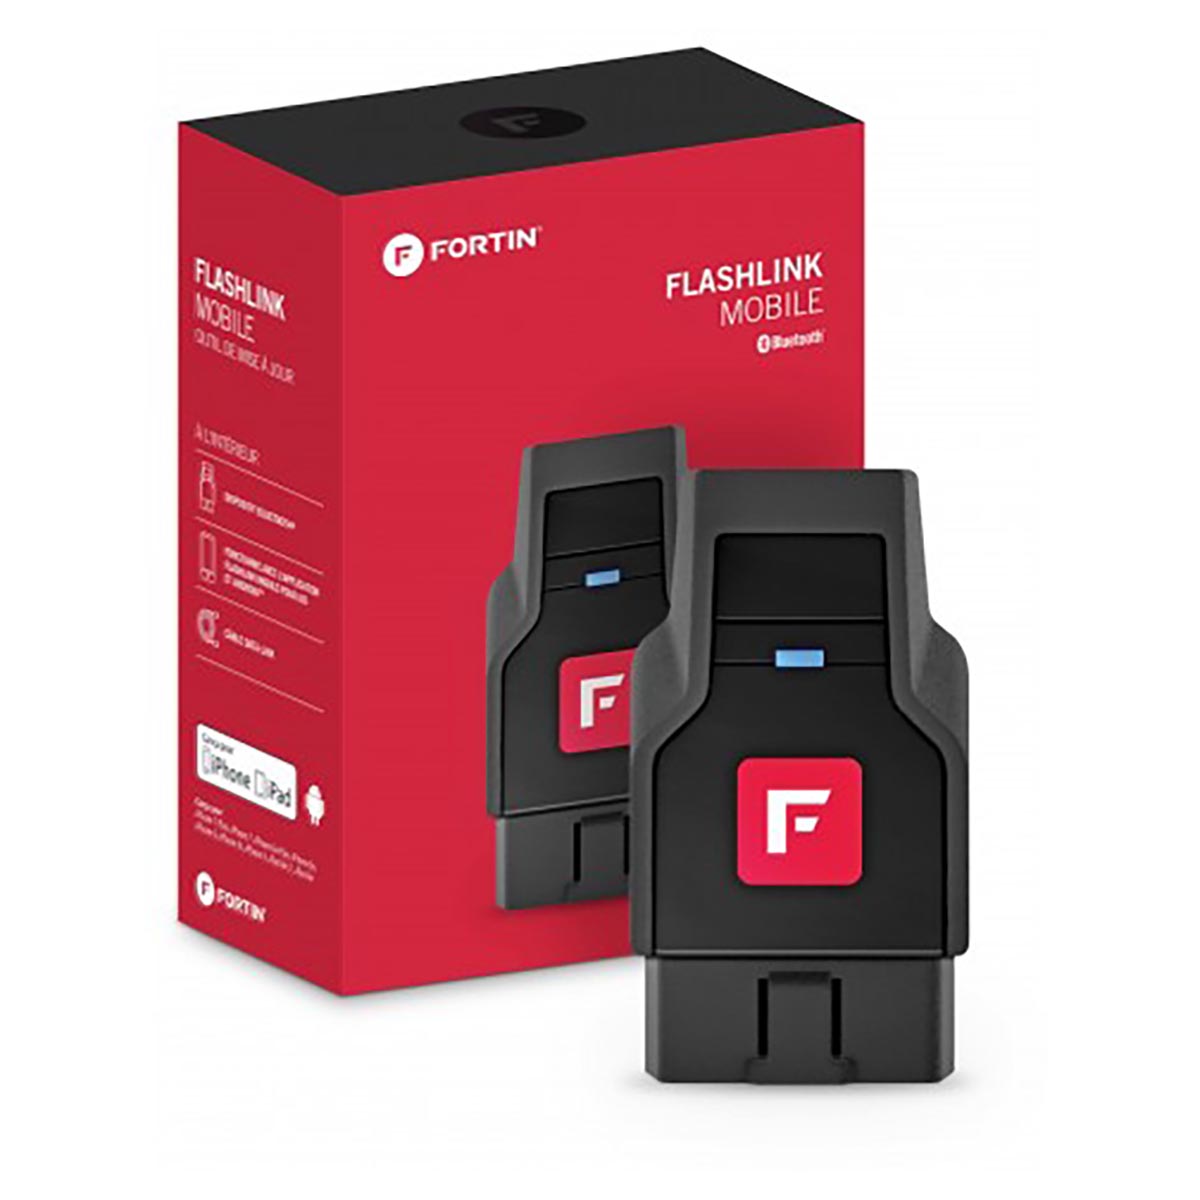 FORTIN FLASHLINKMOBILE Bluetooth Firmware Update Module for iOS and Android Platforms